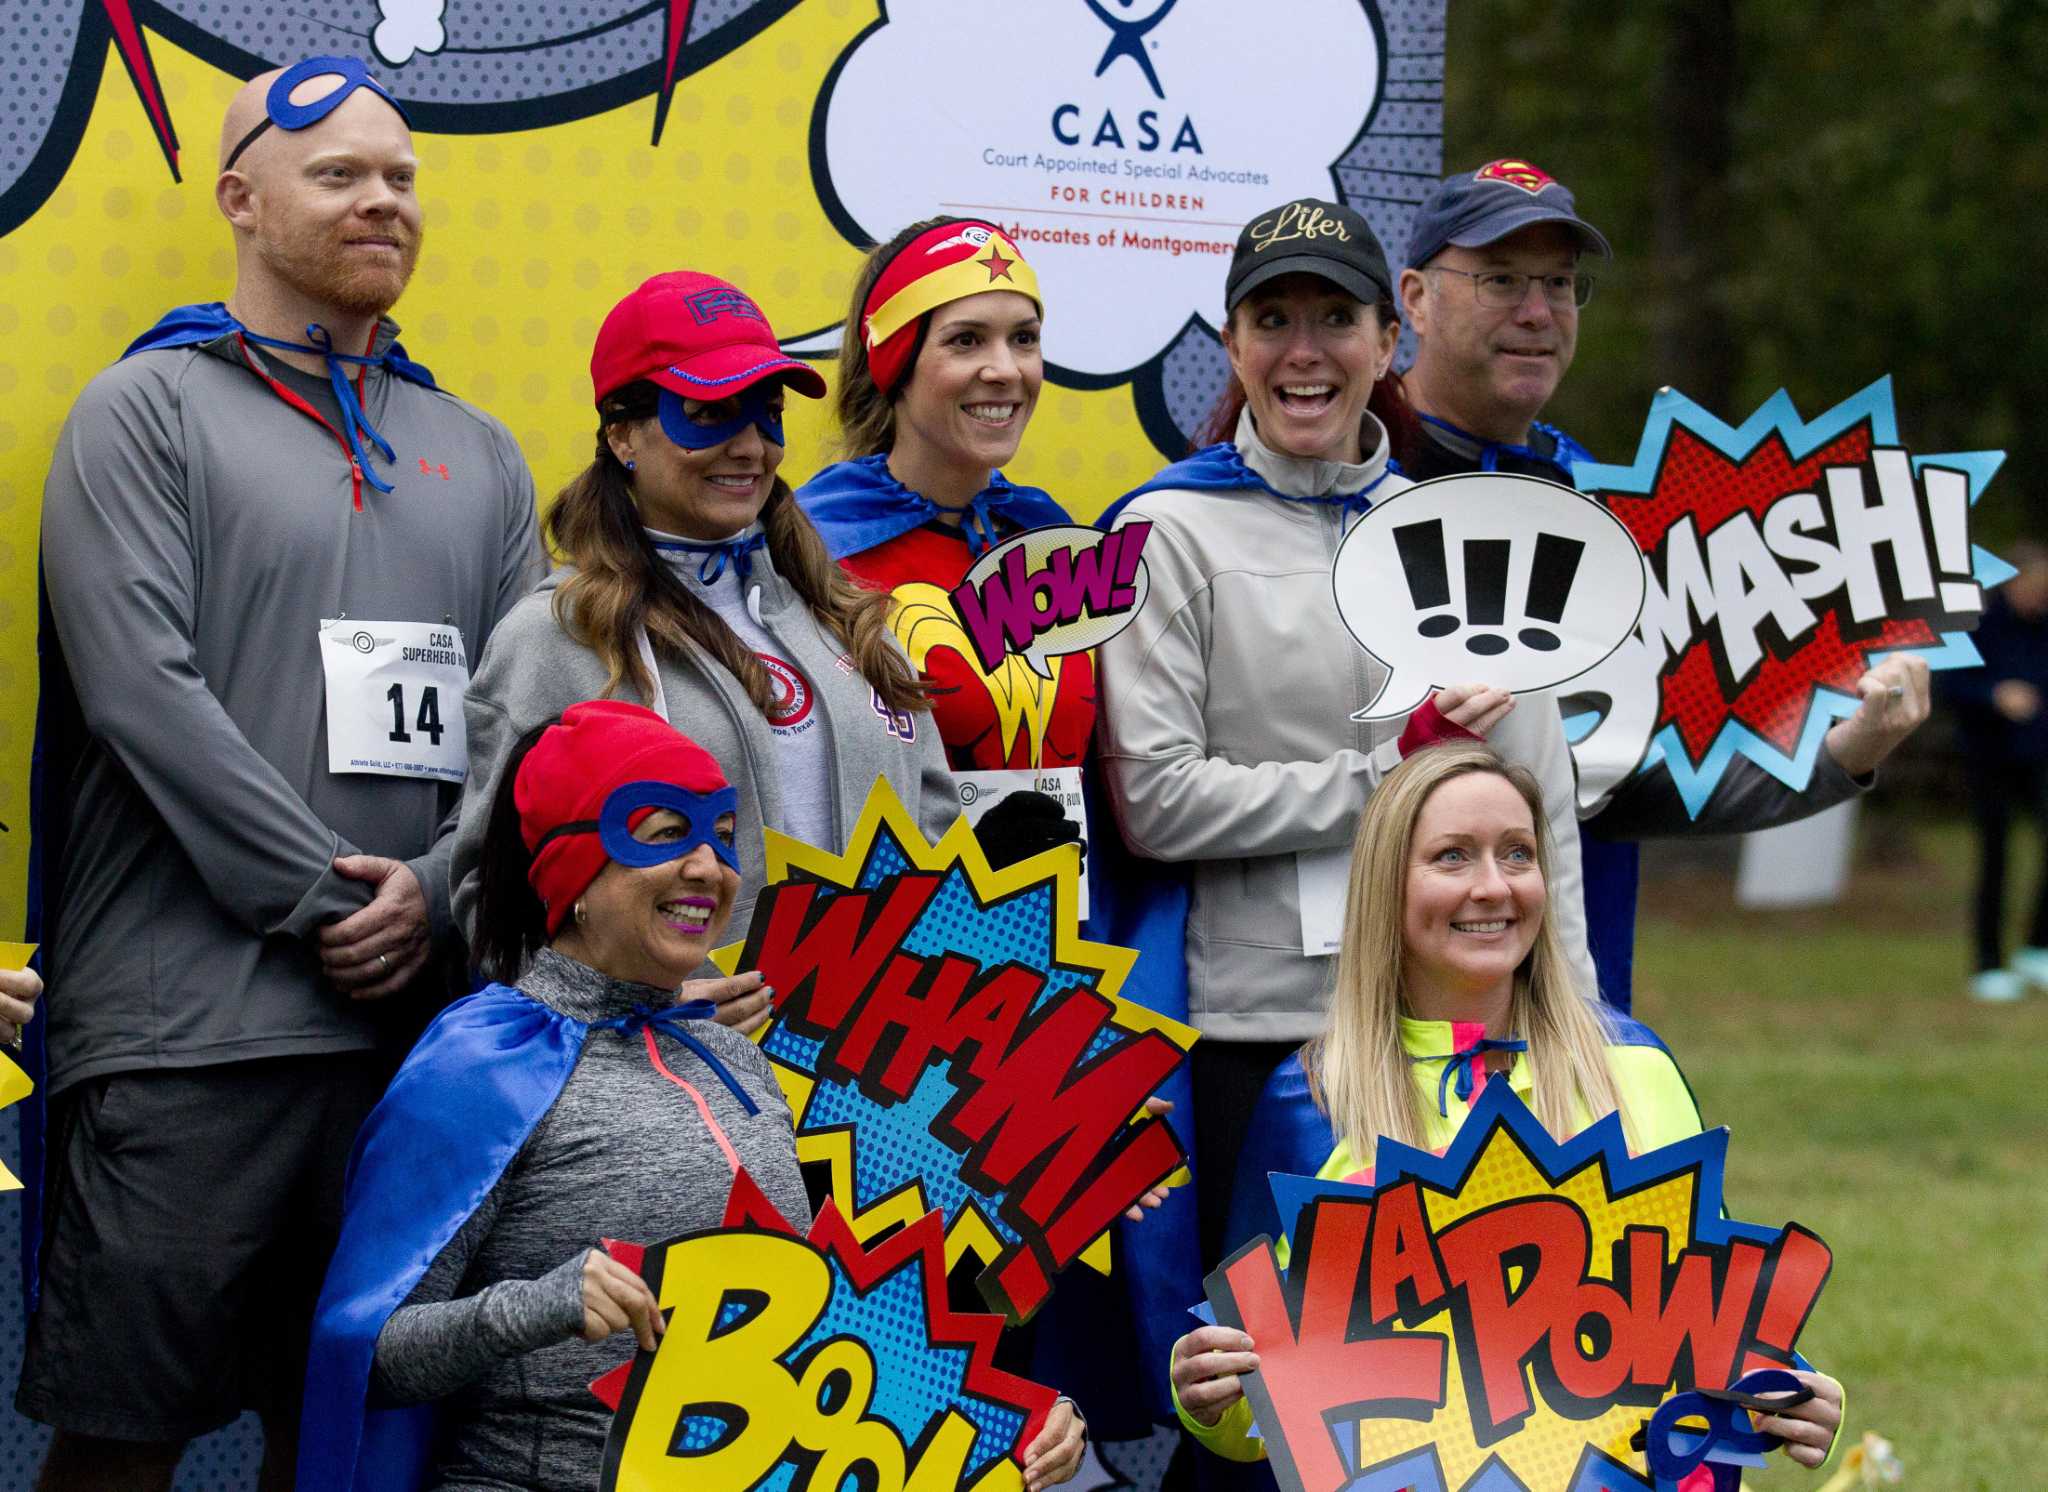 Fitness events happening in Houston: CASA Superhero Run and Fusion Belly Dance